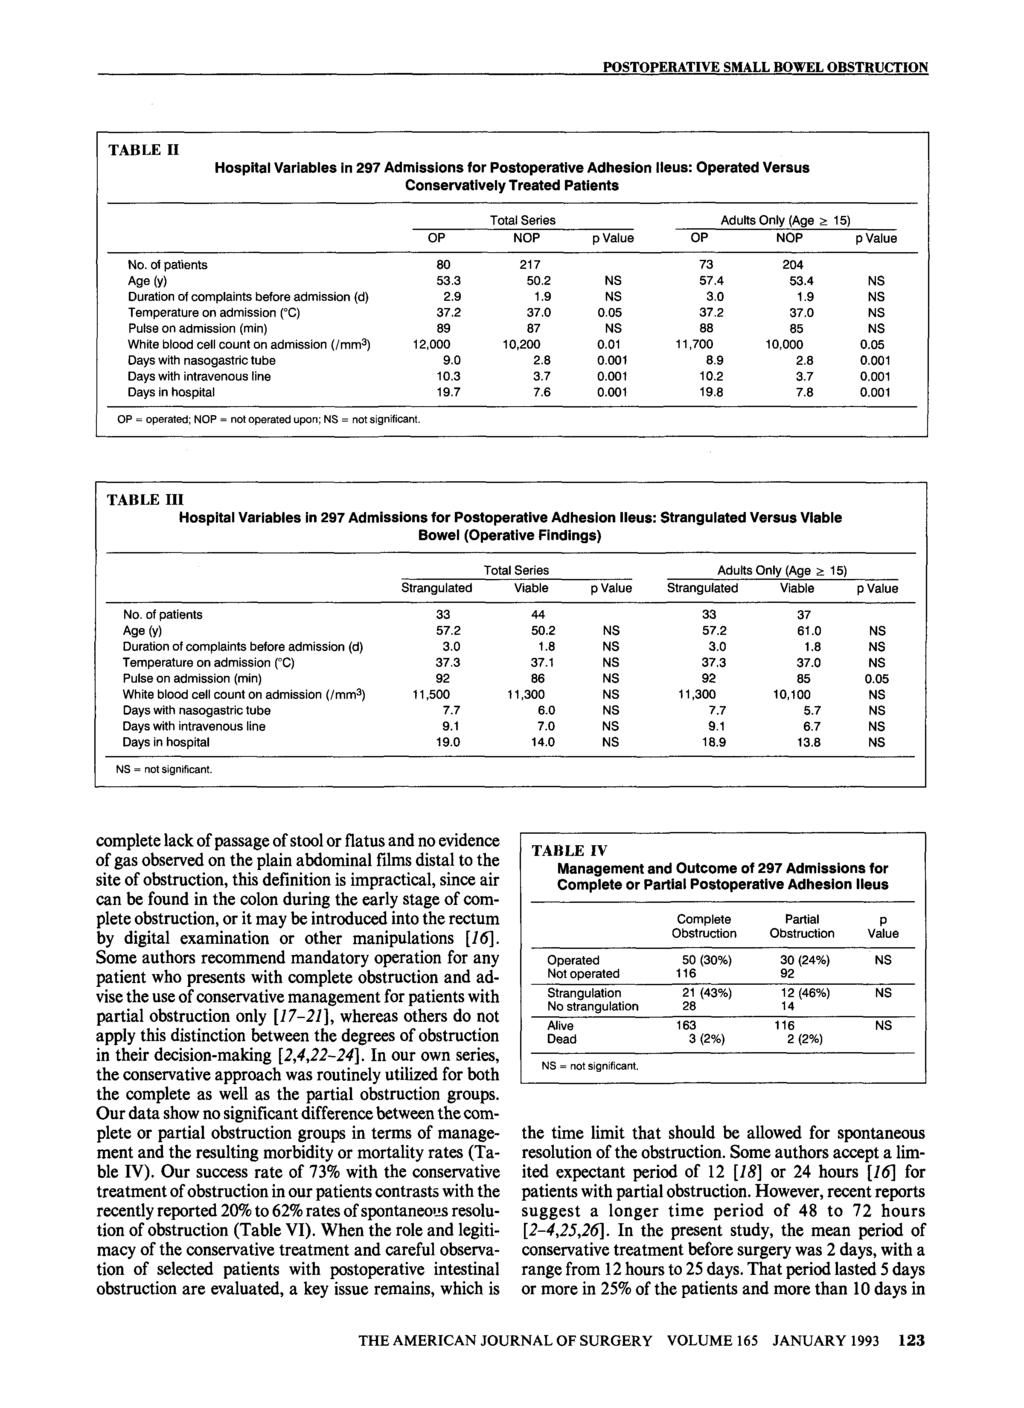 POSTOPERATIVE SMALL BOWEL OBSTRUCTION TABLE II Hospital Variables in 297 Admissions for Postoperative Adhesion Ileus: Operated Versus Conservatively Treated Patients Total Series Adults Only (Age _>